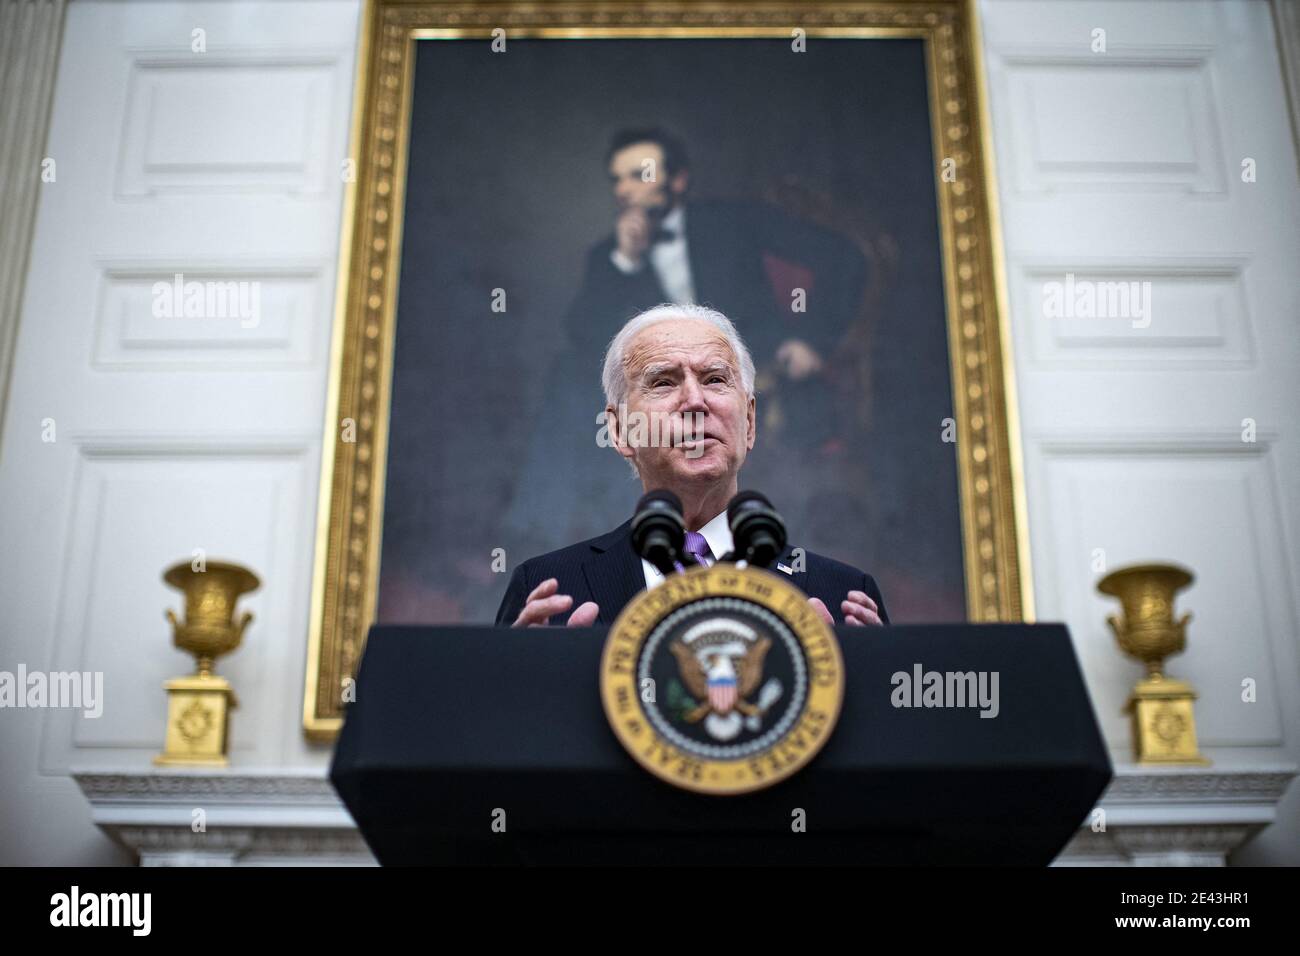 U.S. President Joe Biden speaks on his administrationâÂ€Â™s Covid-19 response in the State Dining Room of the White House in Washington, D.C., U.S., on Thursday, Jan. 21, 2021. Biden in his first full day in office plans to issue a sweeping set of executive orders to tackle the raging Covid-19 pandemic that will rapidly reverse or refashion many of his predecessor's most heavily criticized policies. Photo by Al Drago/Pool/ABACAPRESS.COM Stock Photo